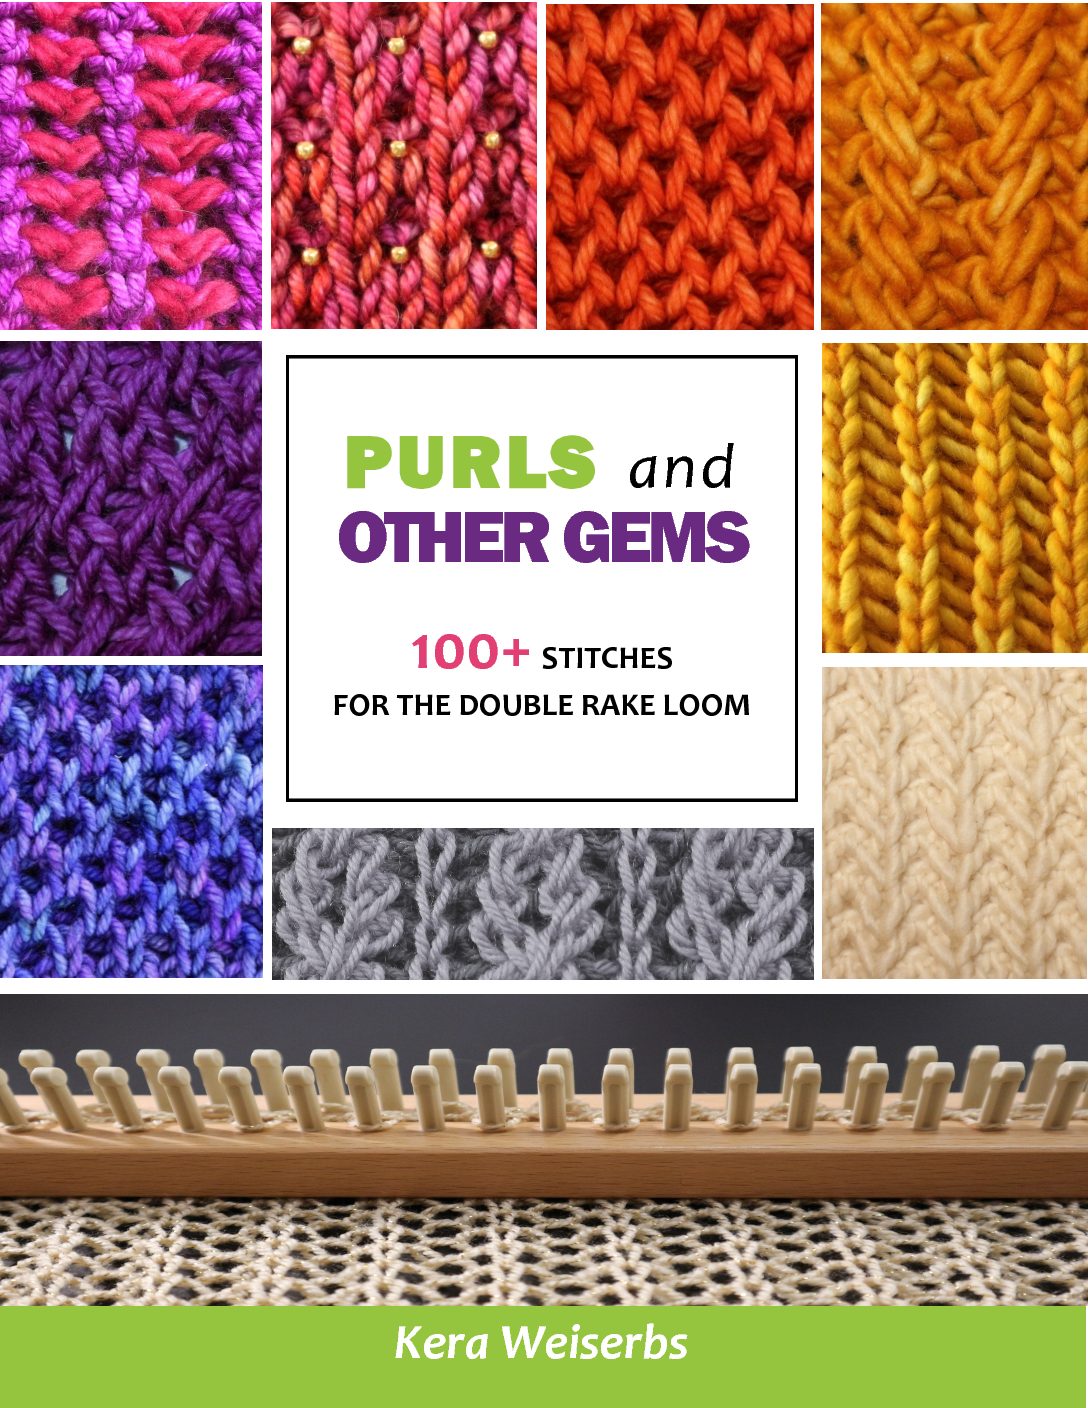 PURLS and OTHER GEMS